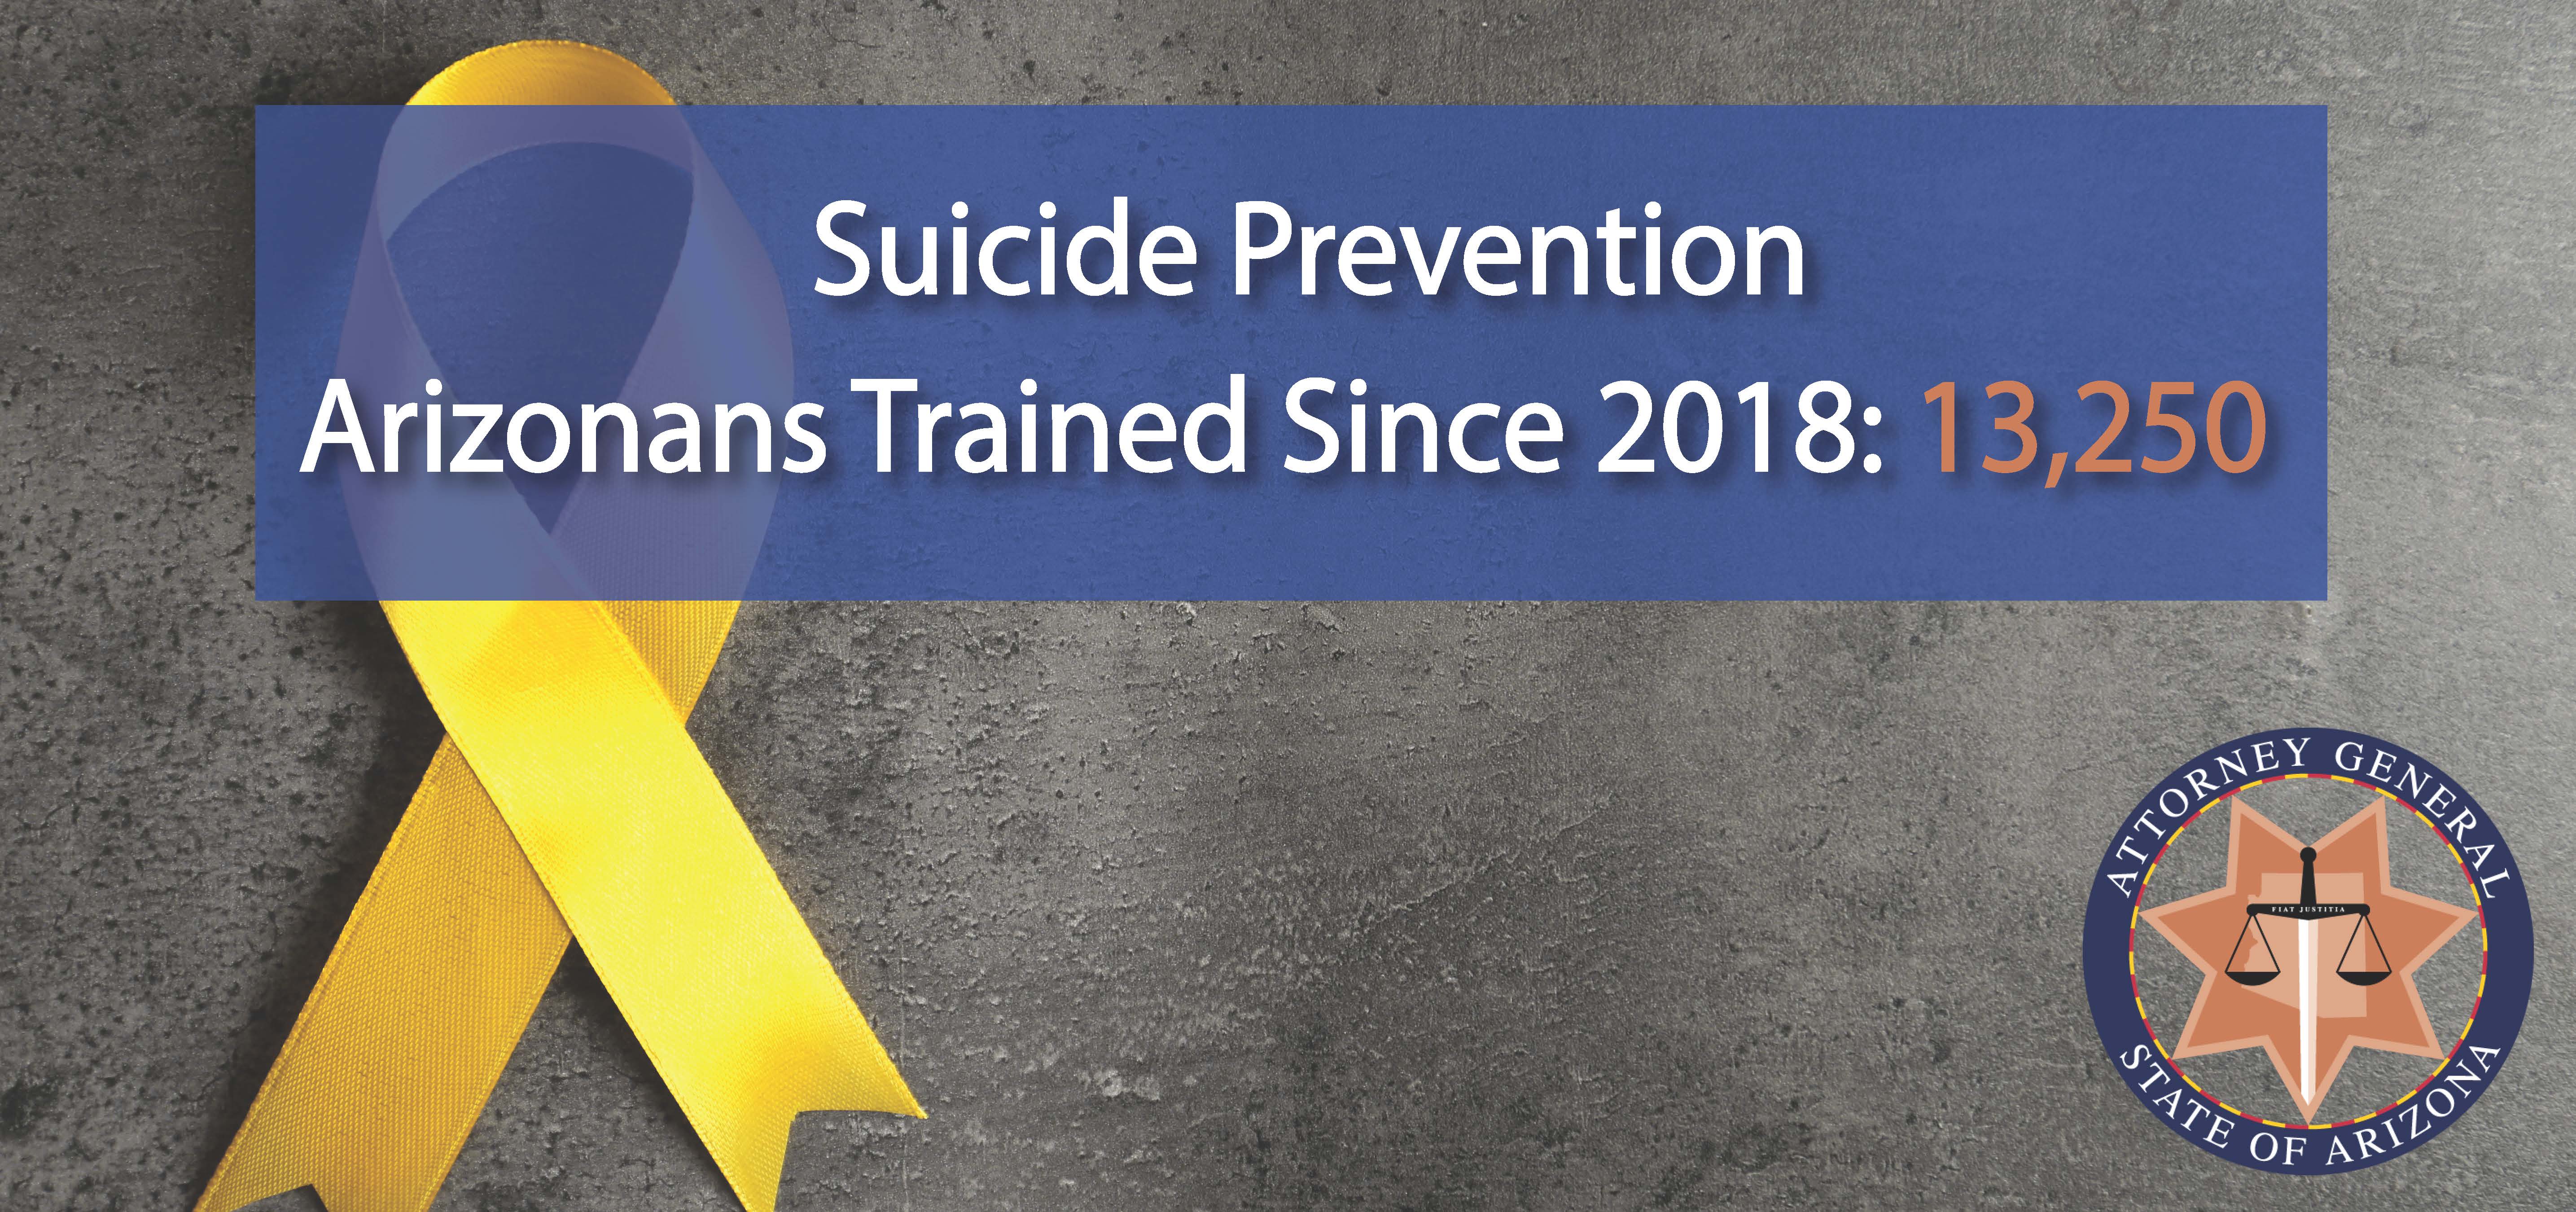 Banner informing that over 10,000 Arizonans have received Suicide Prevention training.